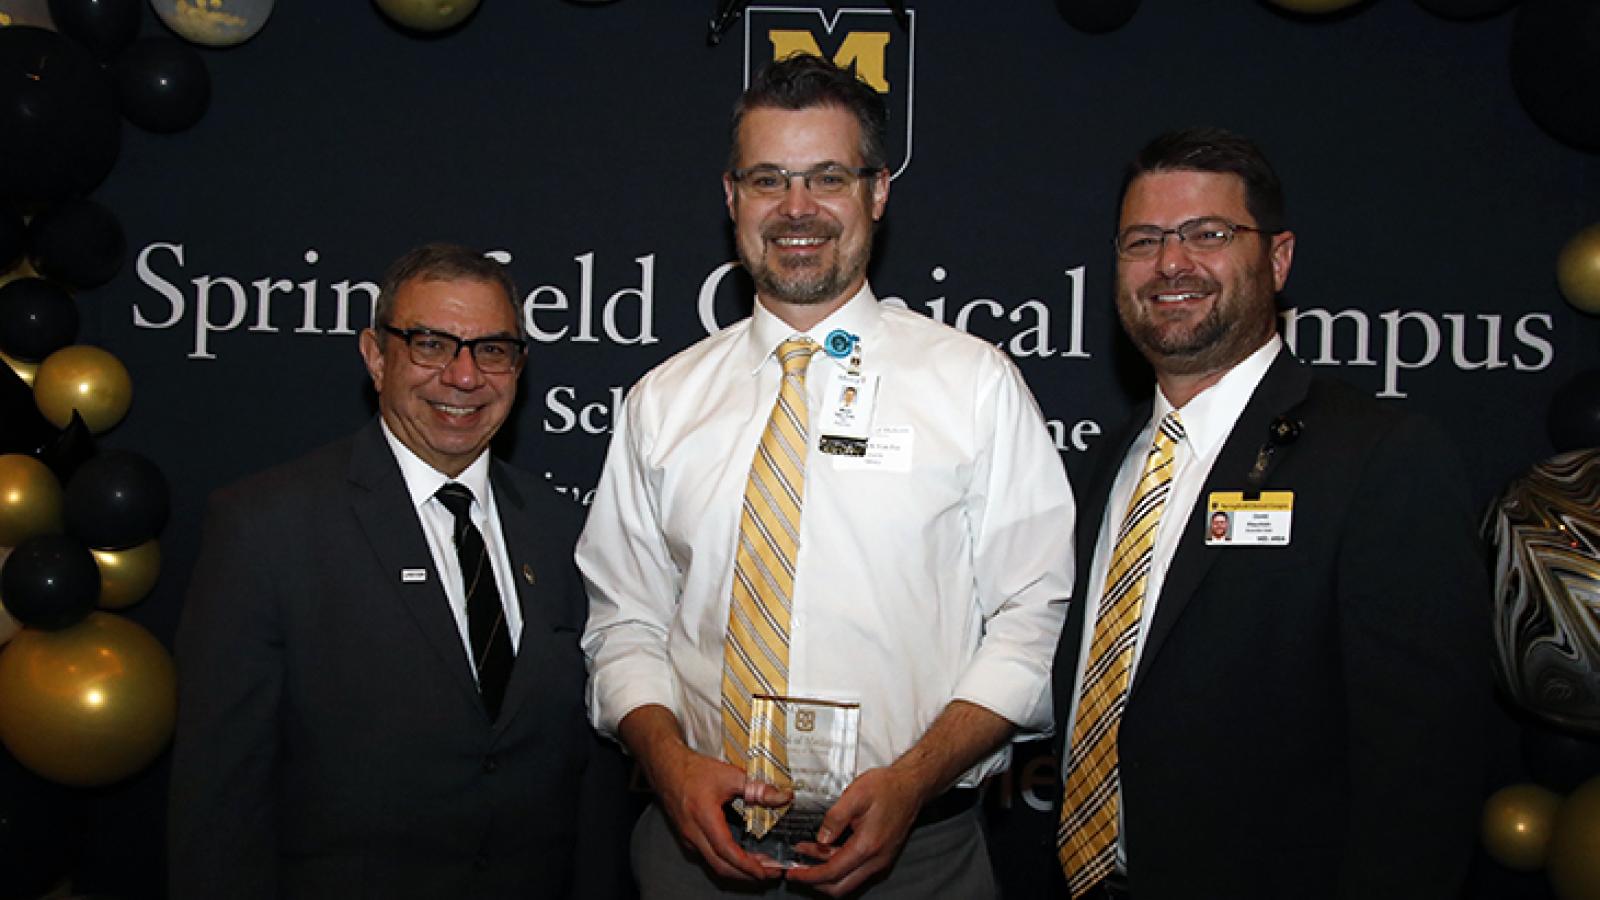 Mark Van Ess as the 2023 Springfield Clinical Campus Subspecialty Preceptor of the Year